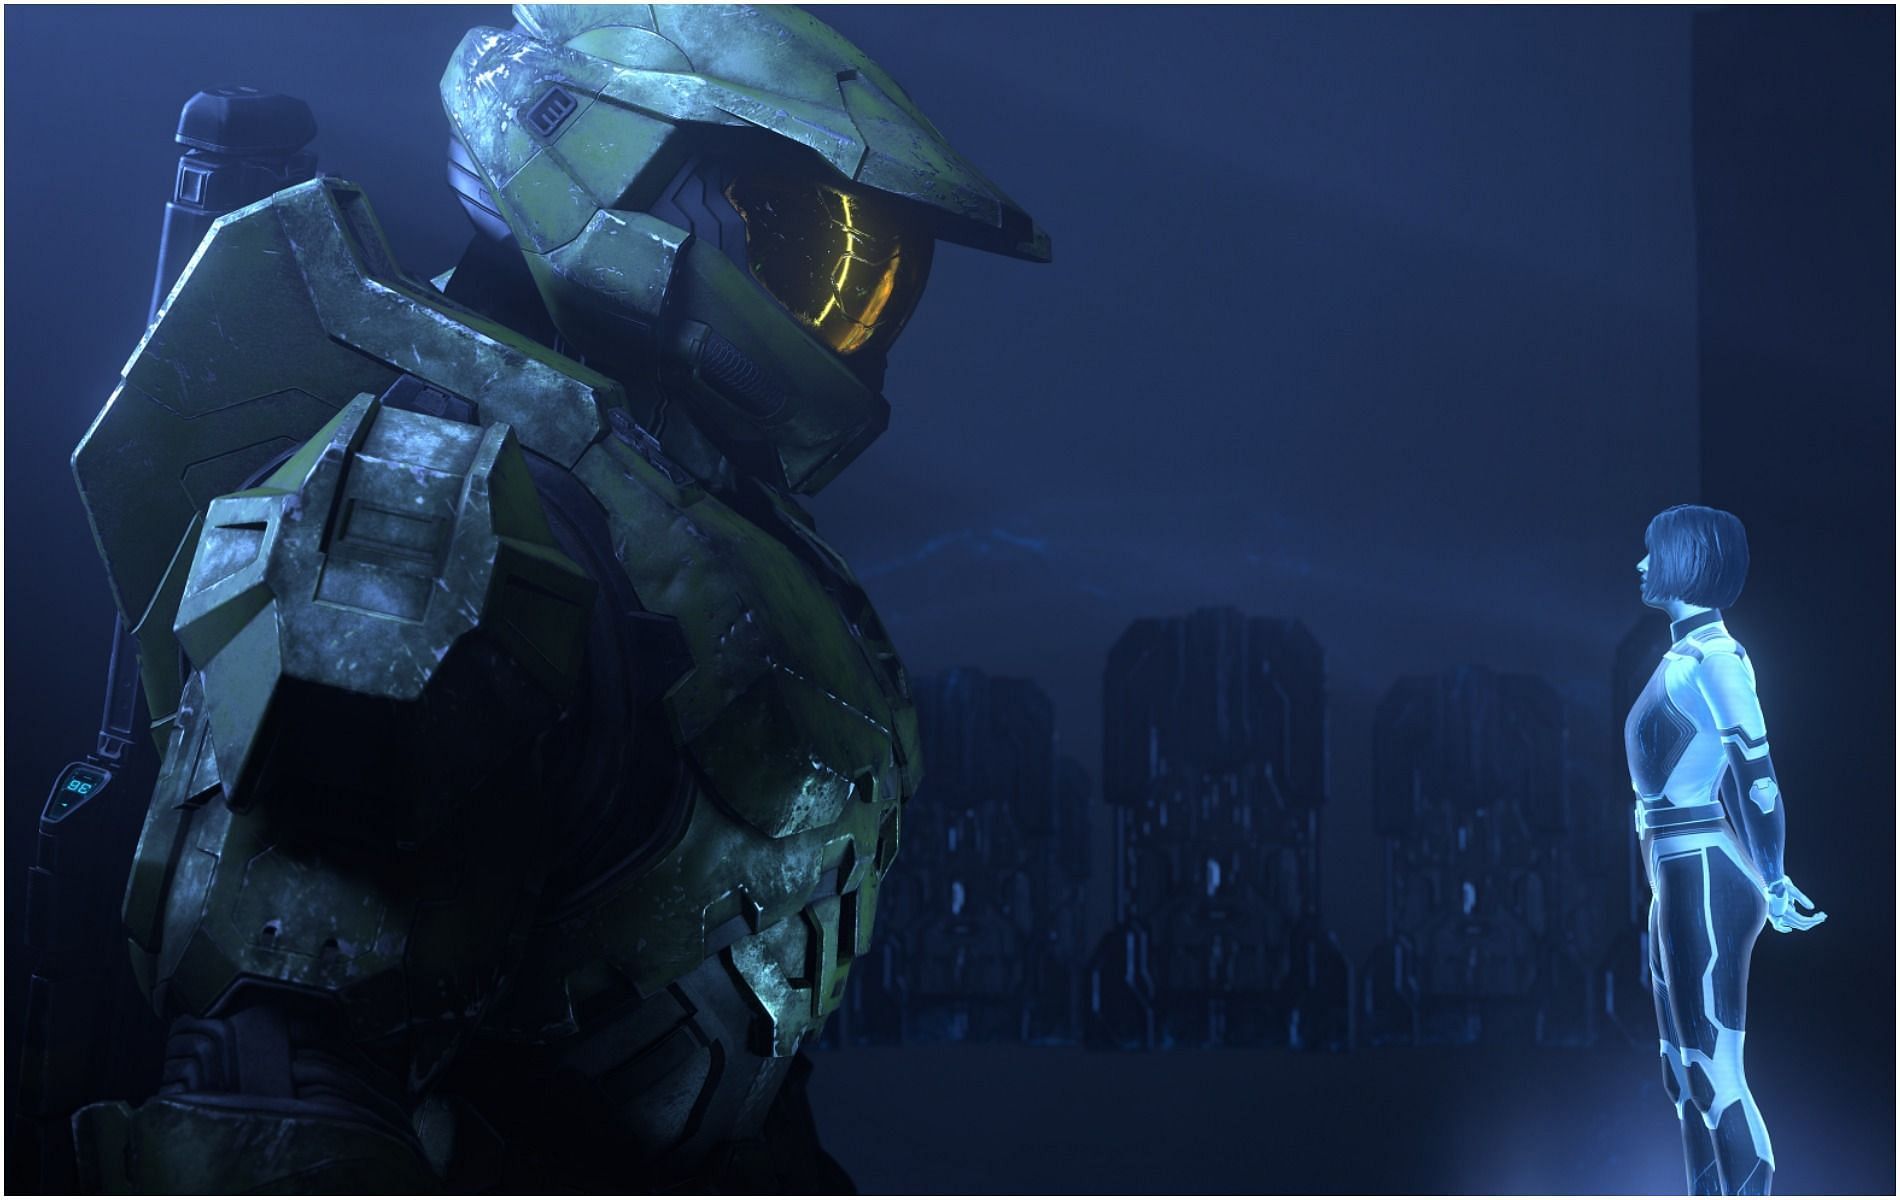 Halo Infinite devs are looking to fix all the macro issues in the game before season 2 (Image via 343 Industries)